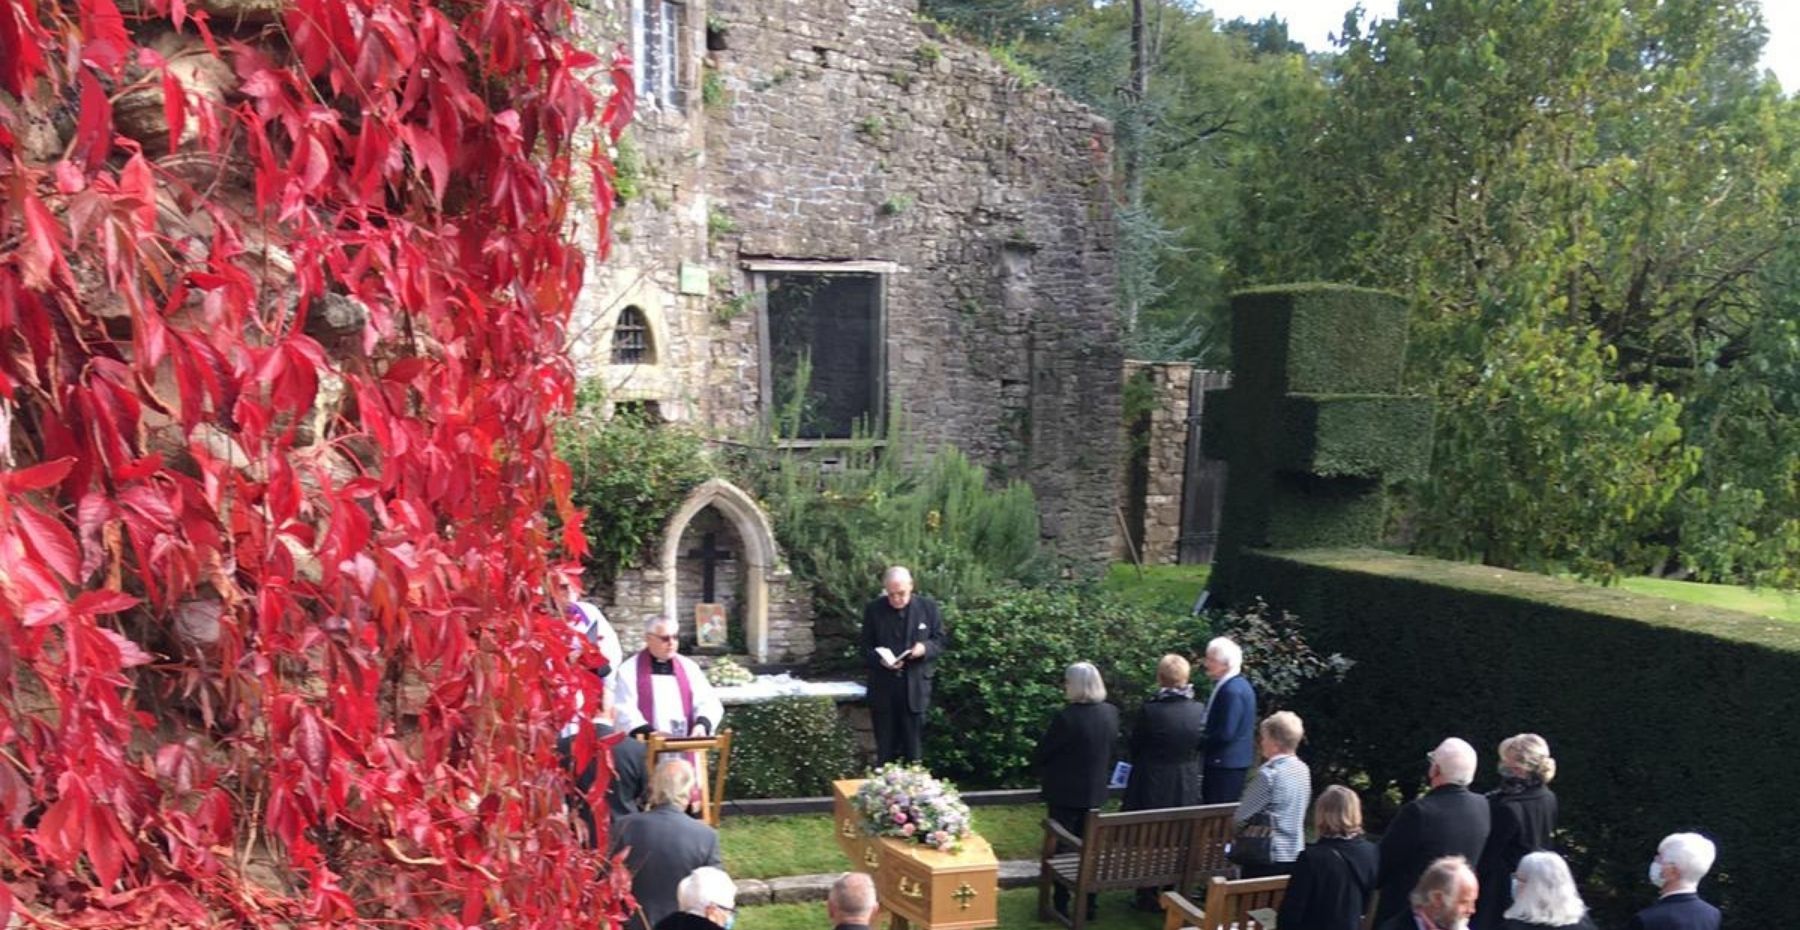 Religious ceremony held within the castle grounds at Usk.